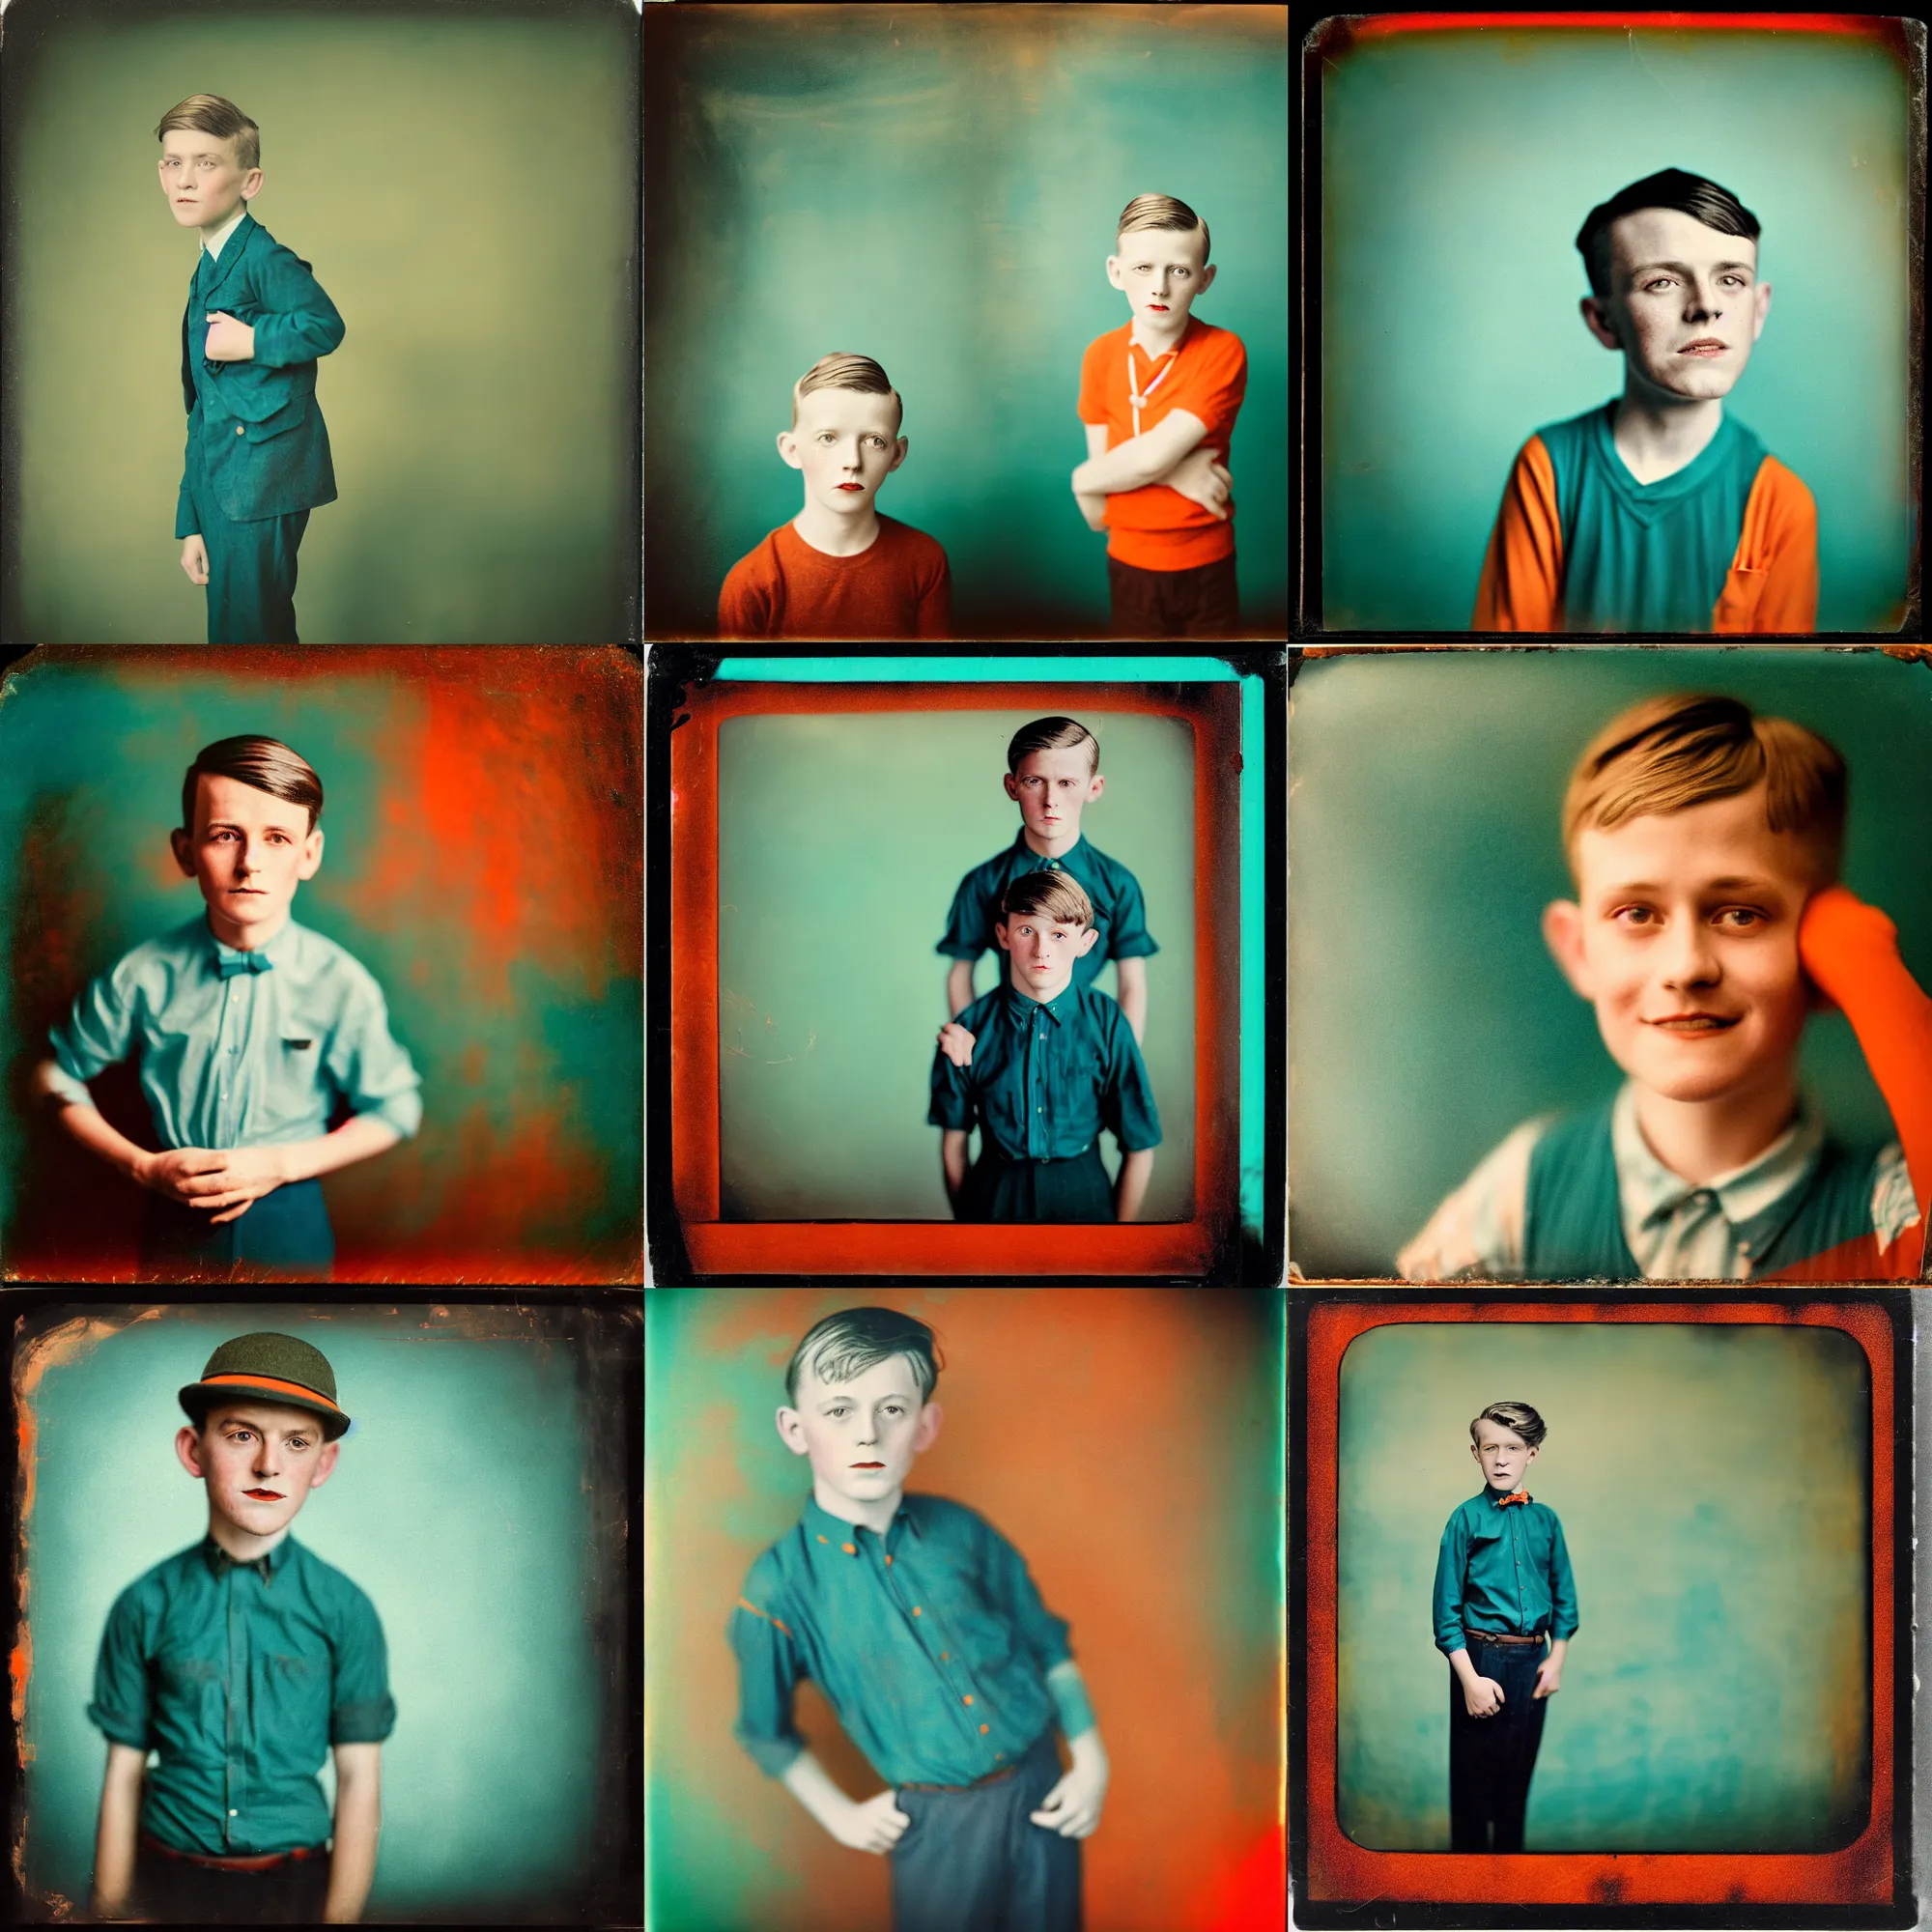 Prompt: kodak portra 4 0 0, wetplate, motion blur, portrait photo of a backdrop, 8 year old handsome boy, 1 9 3 0 s style, coloured in teal and orange, in style of britt marling